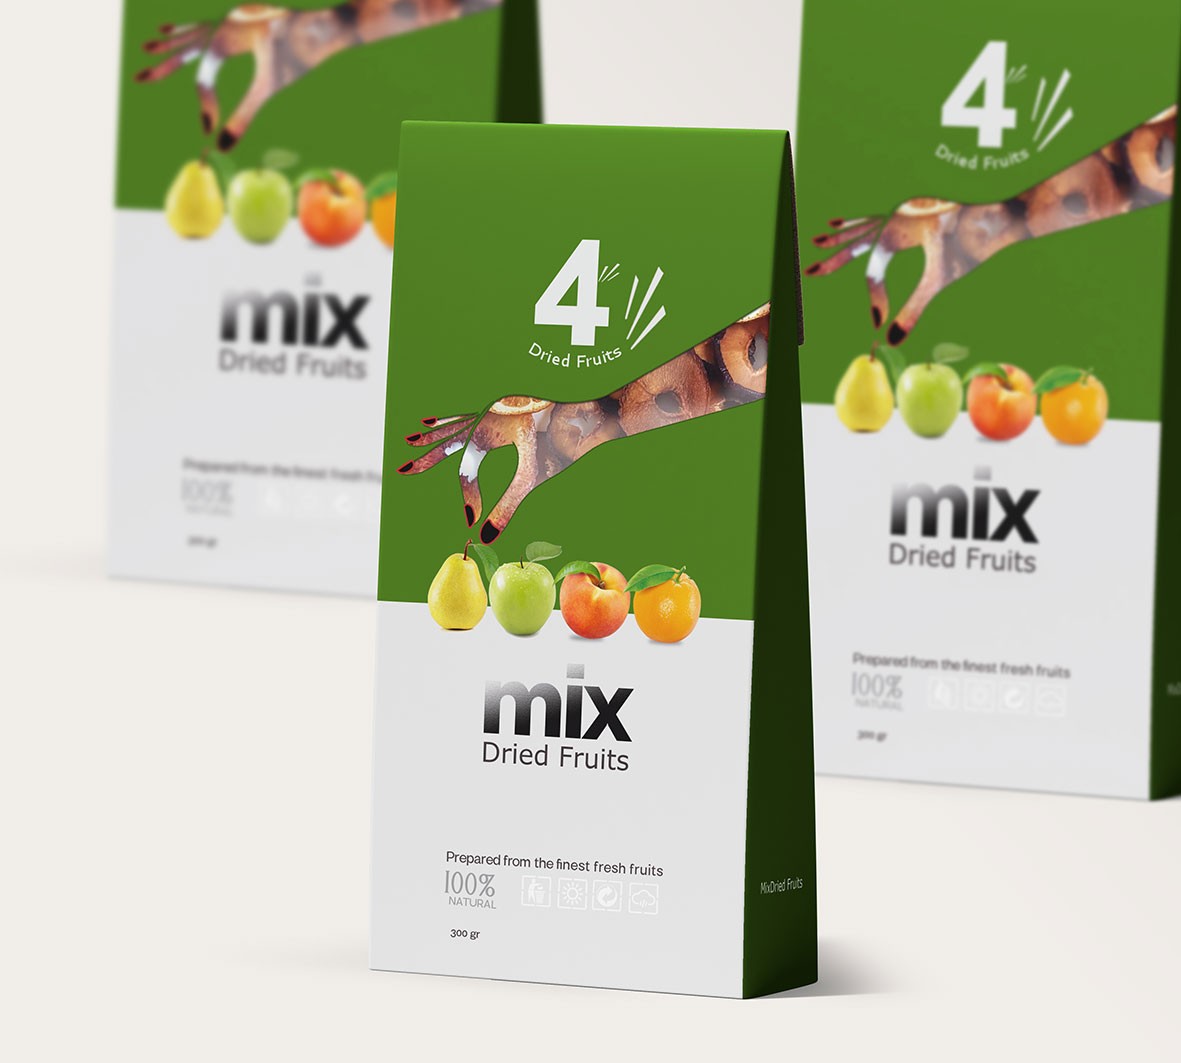 Mix Dried Fruits Packaging Design from Iran